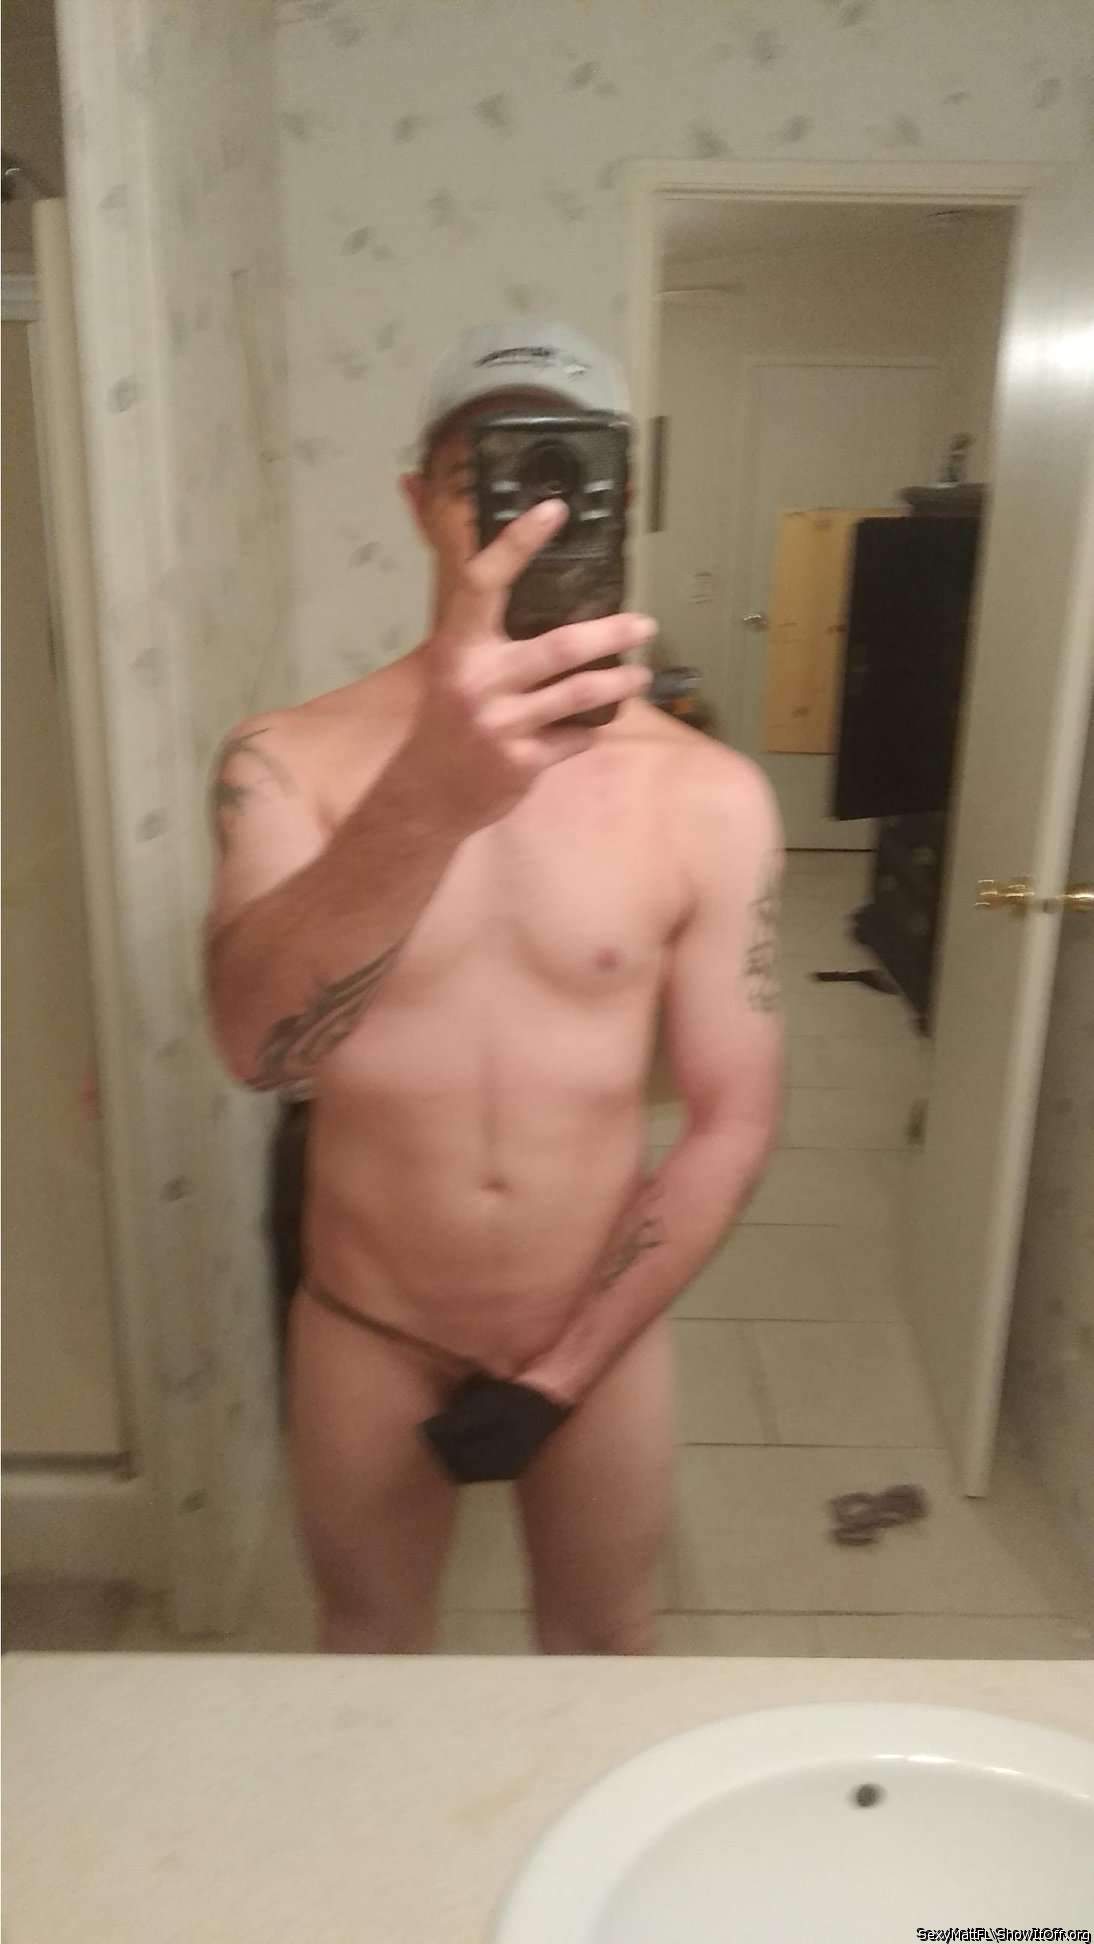 Photo of a private part from SexyMattFL